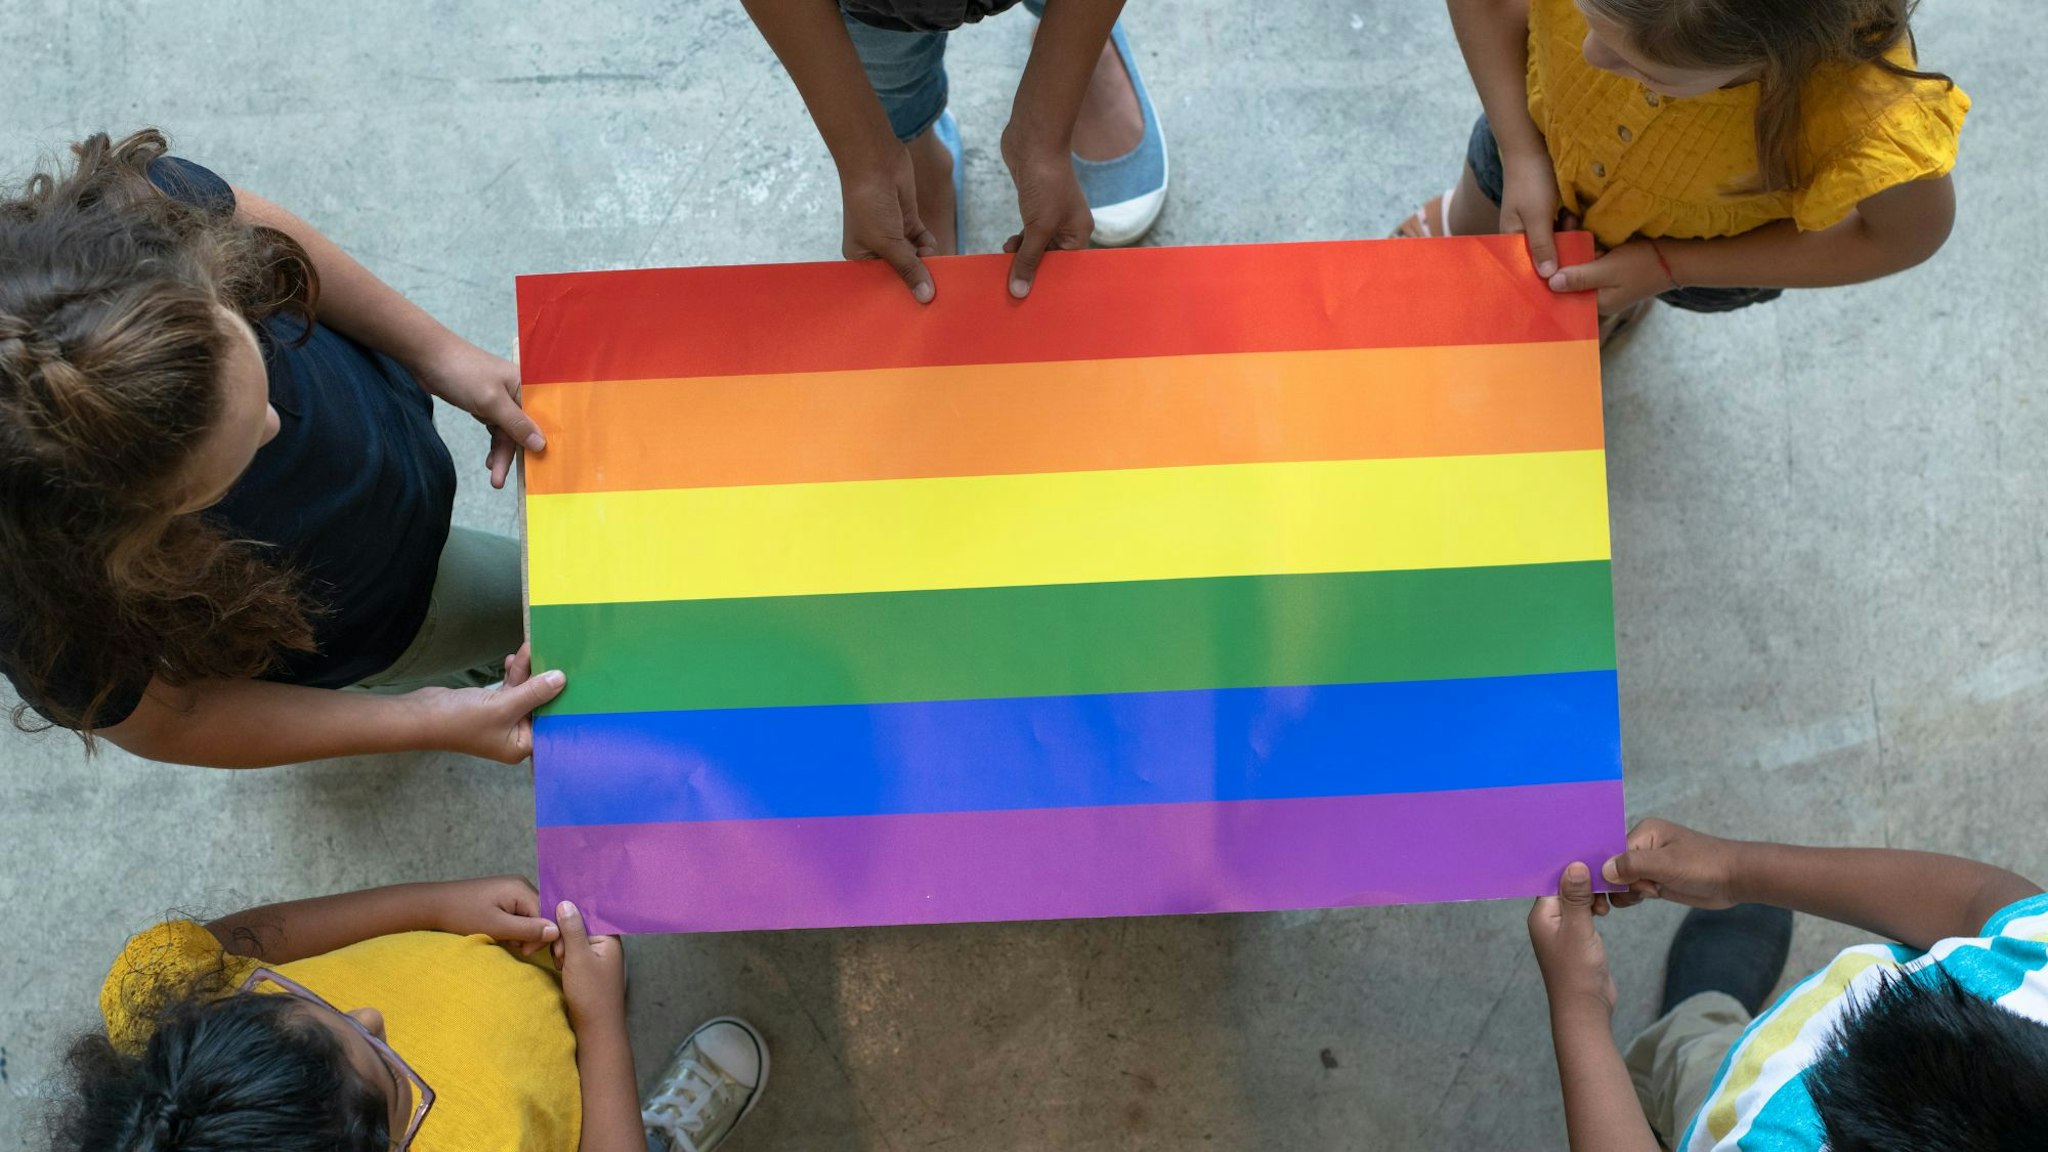 A group of multi-ethnic elementary students stand around a colorful gay pride poster.